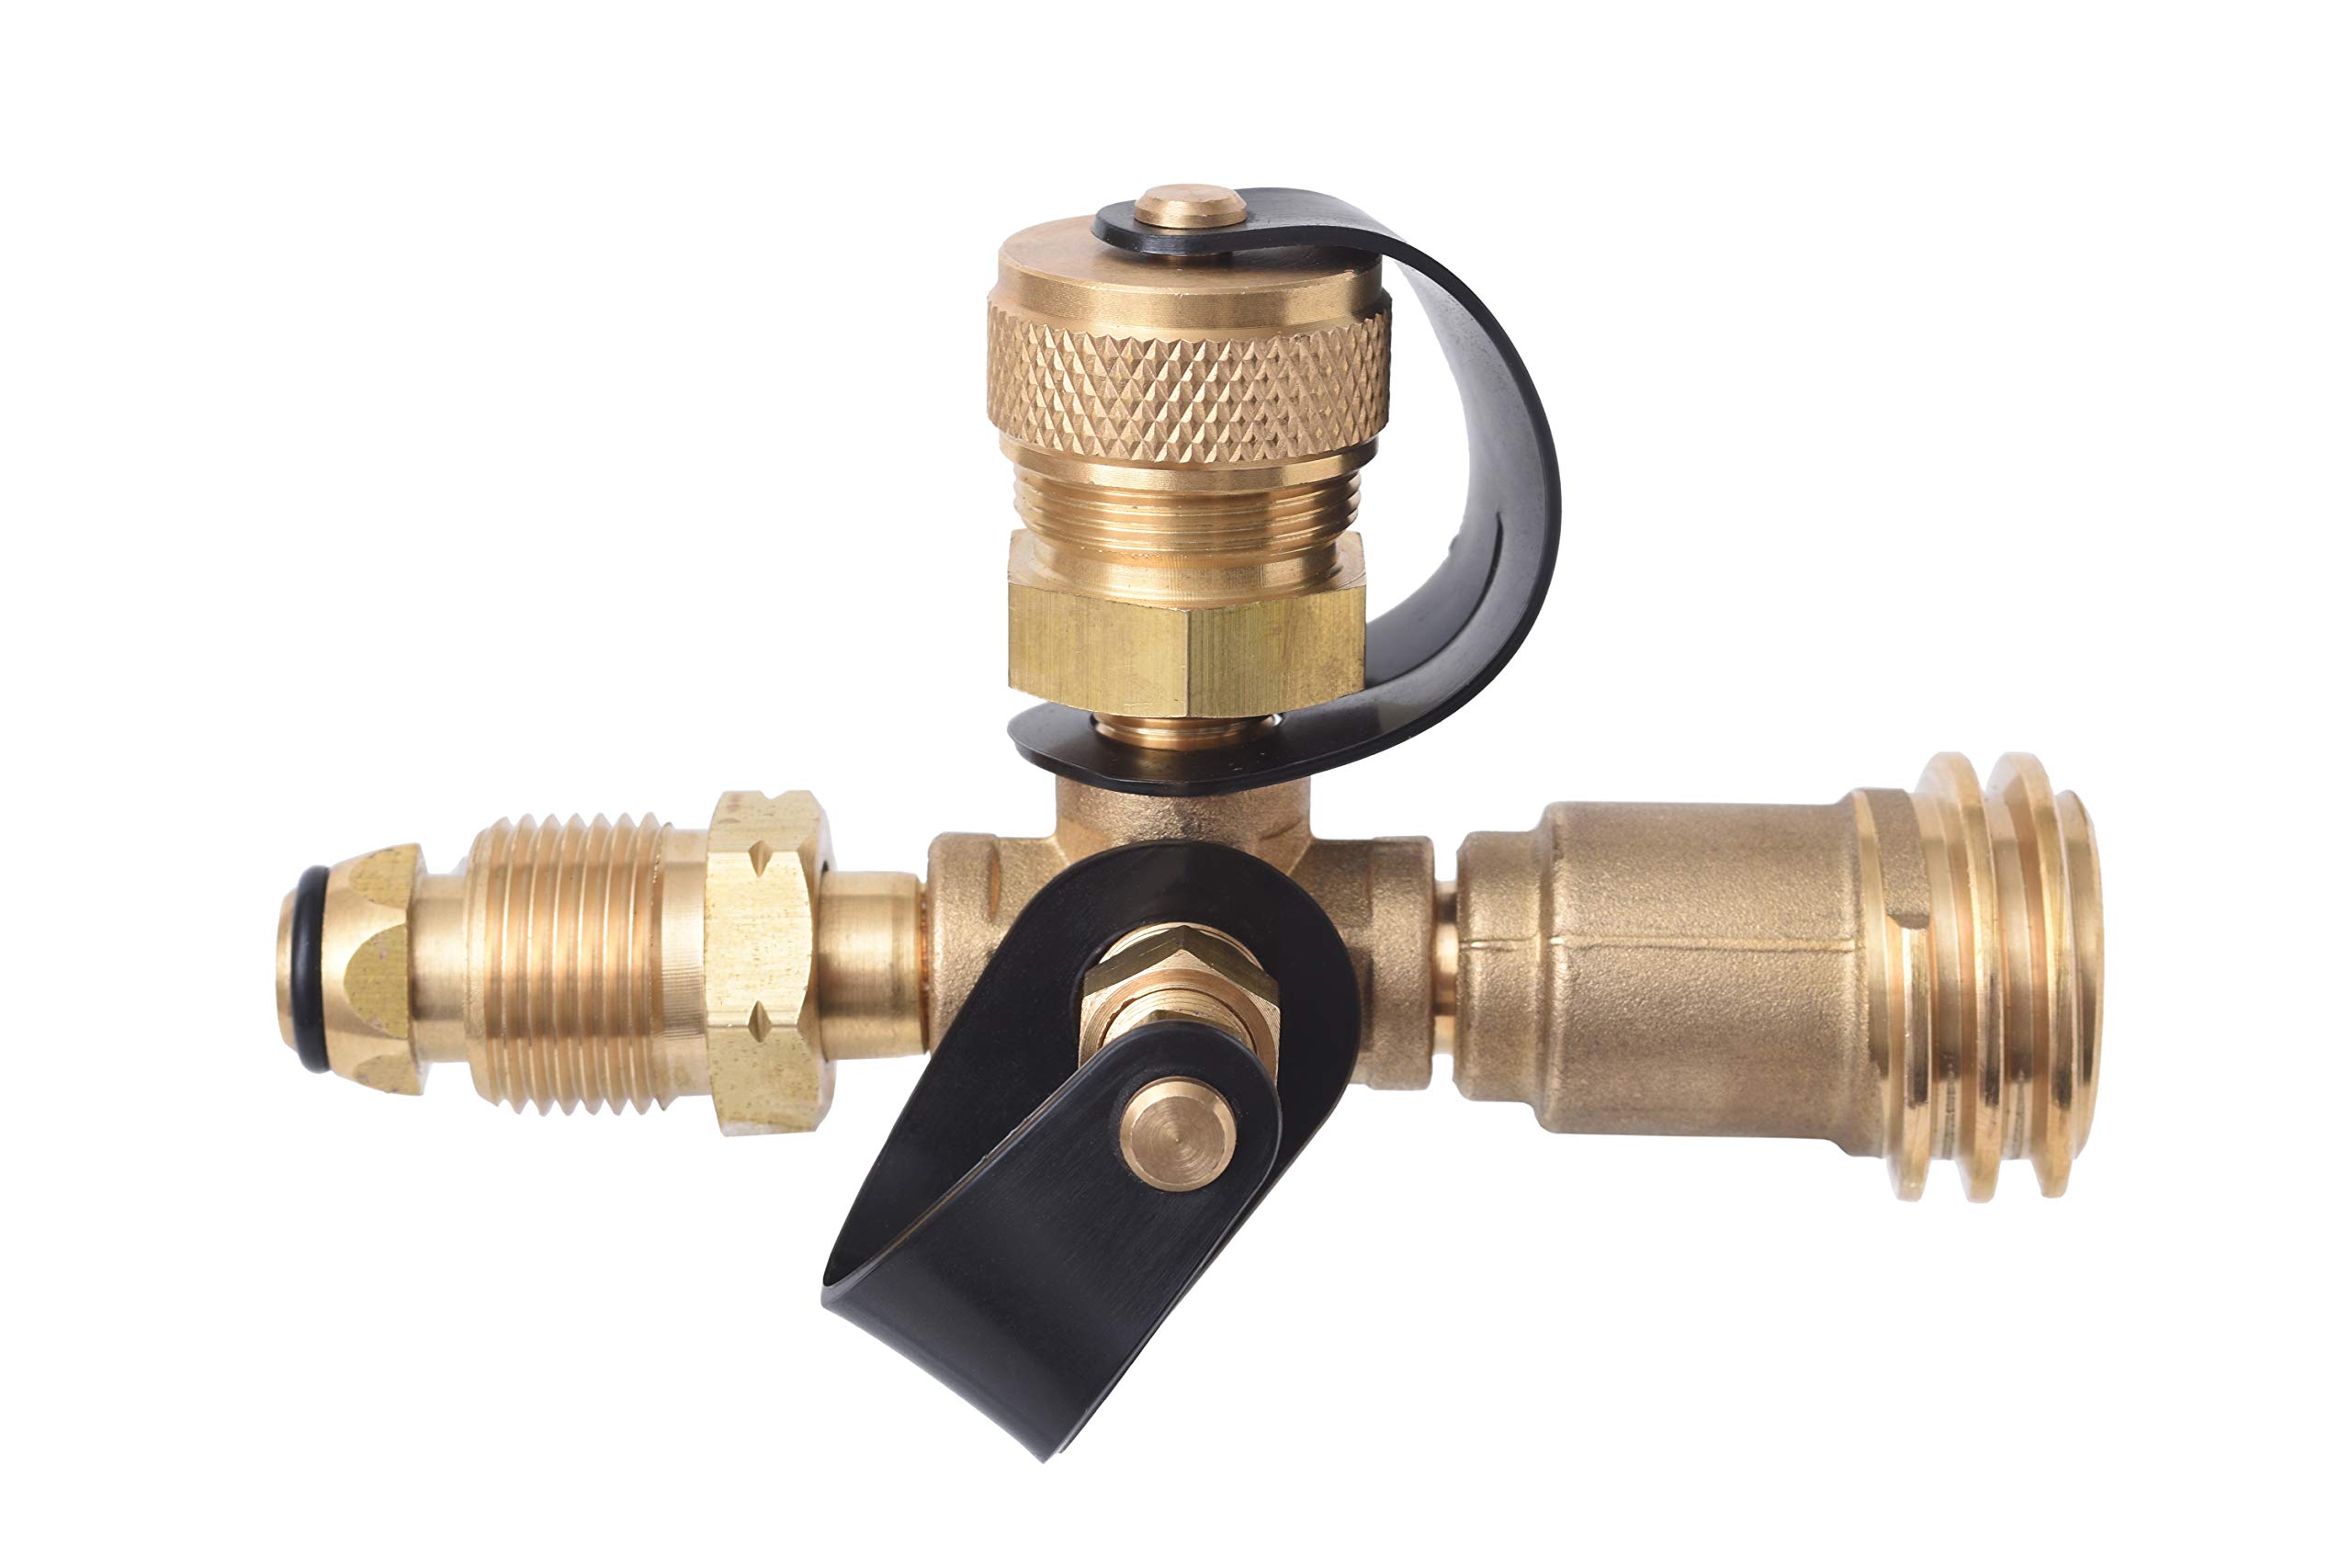 4 PORT BRASS TEE PROPANE ADAP POL INLET 1/4 INVERTED FEMALE FLARE INLET QCC OUTLET CGA600 OUTLET